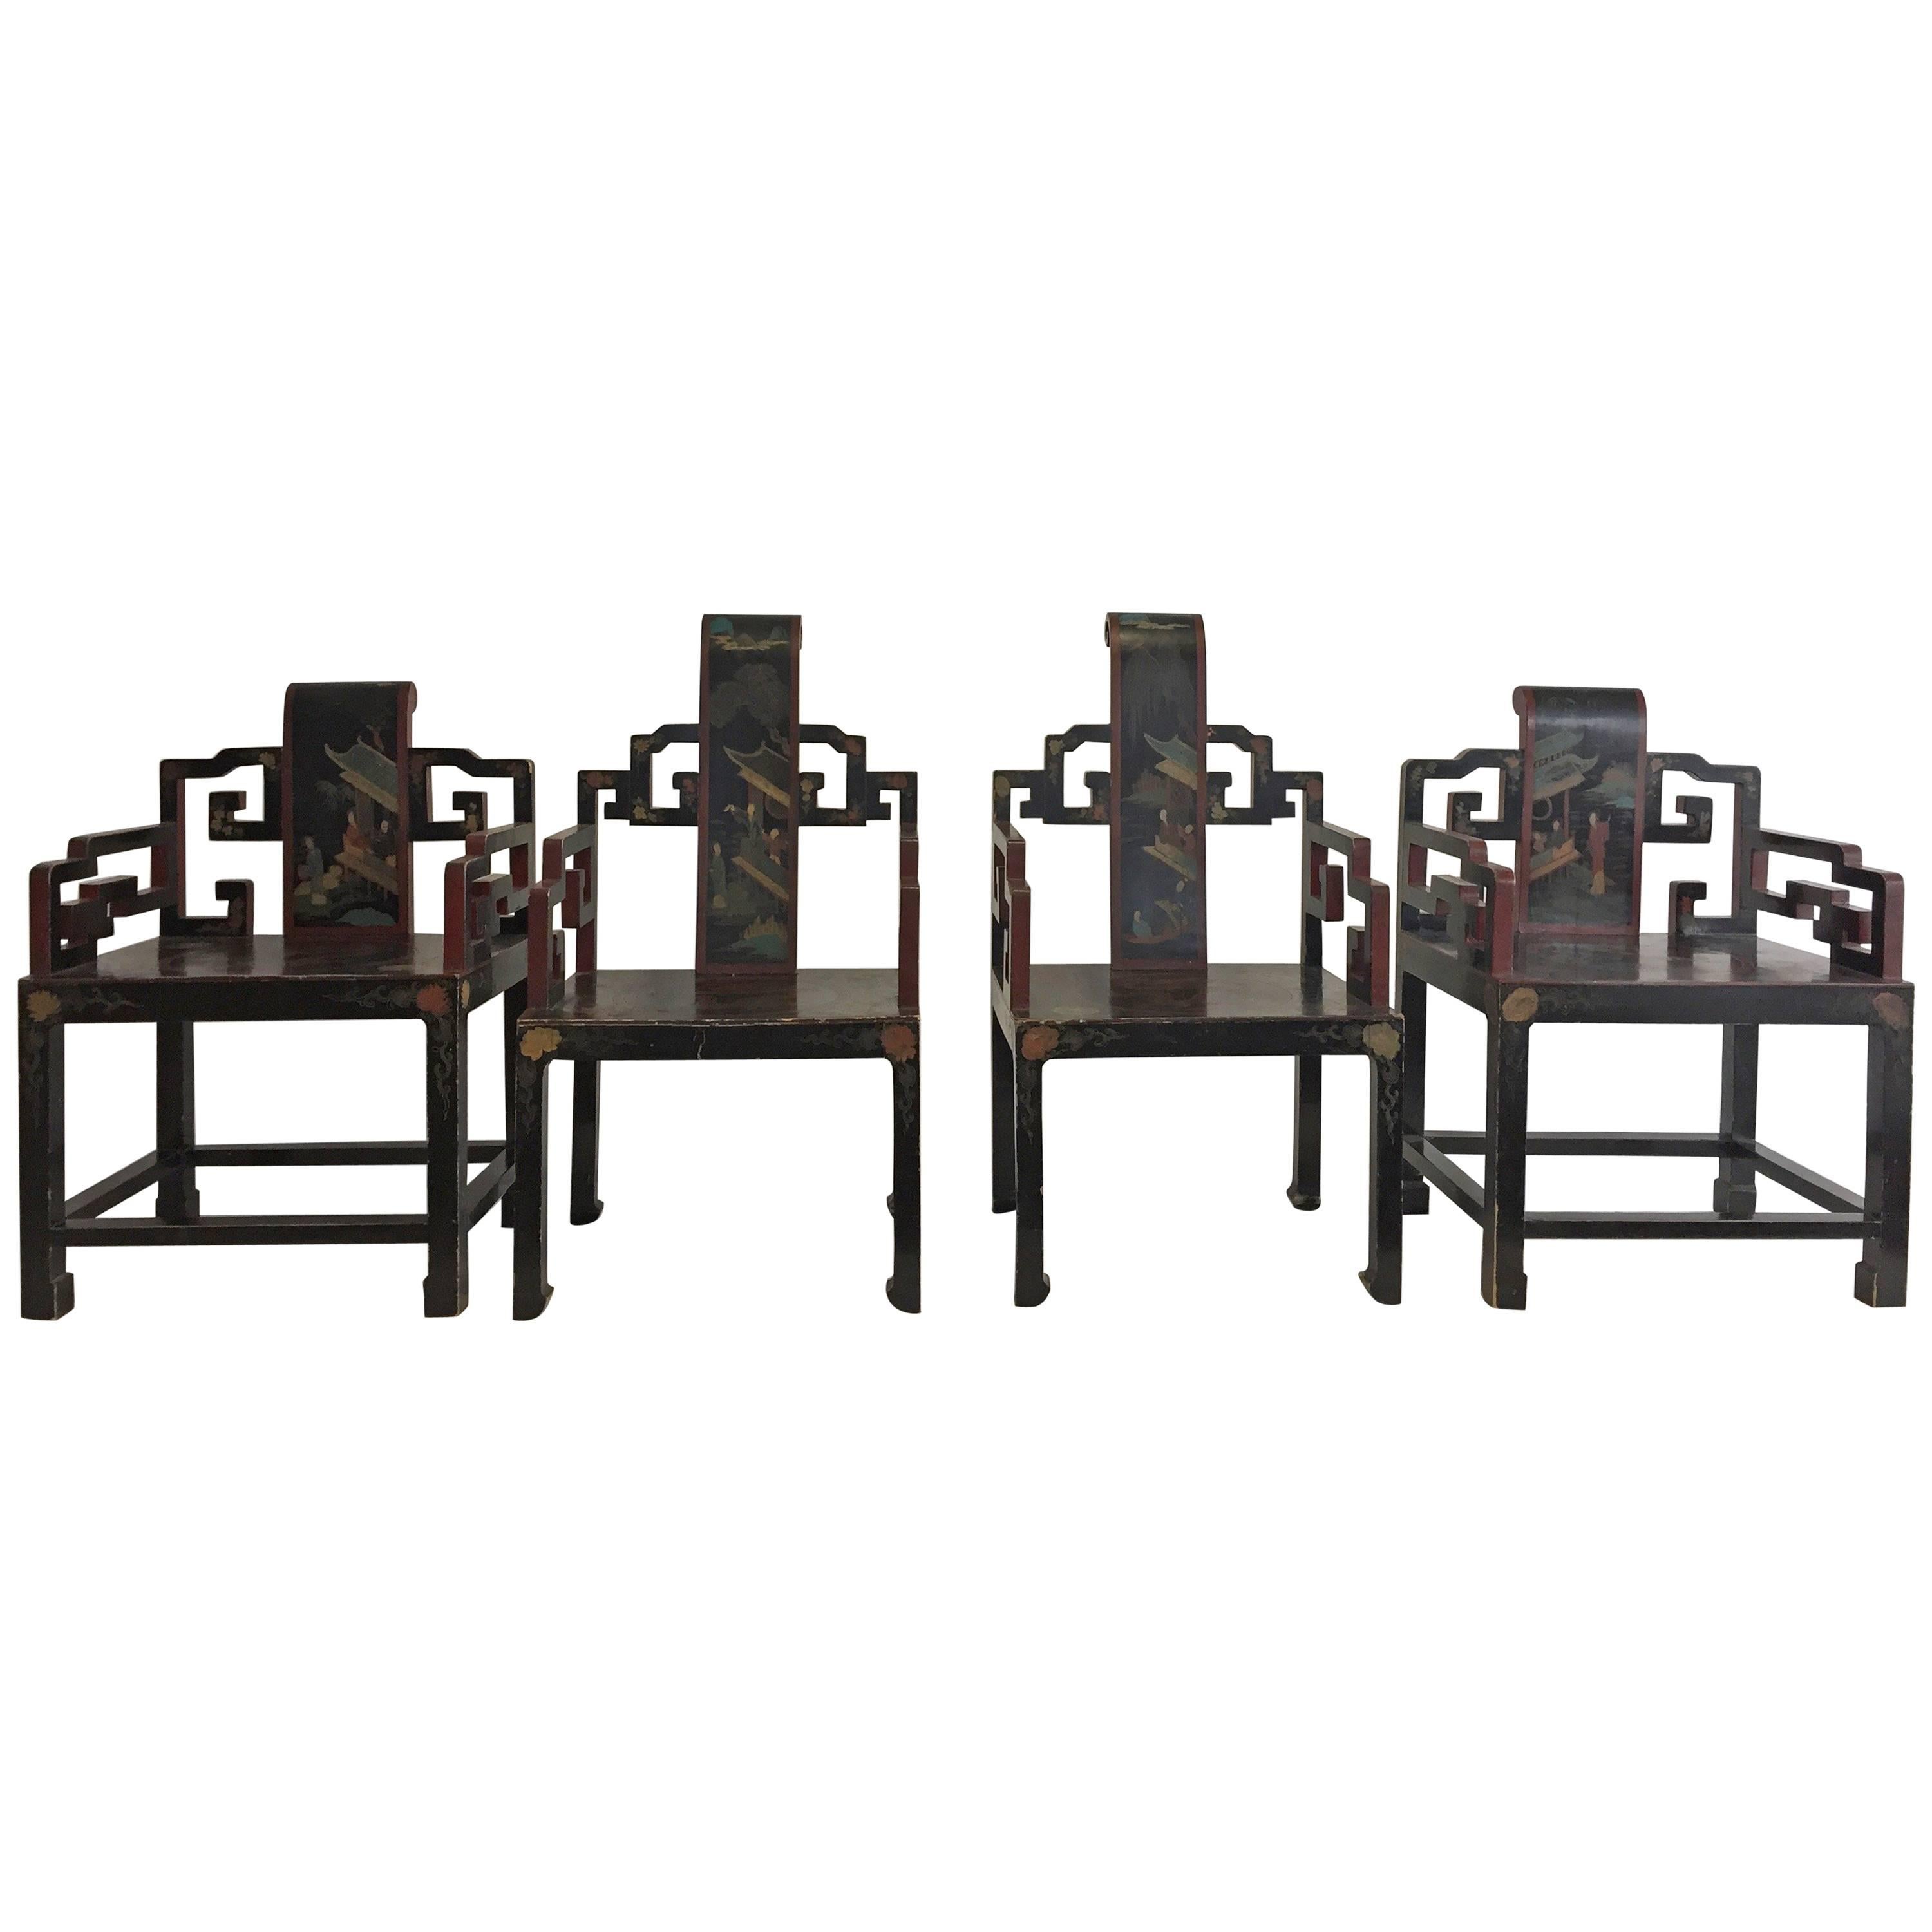 Chinese Art Deco Chairs Carved And Hand-Painted Set Of Four For Sale